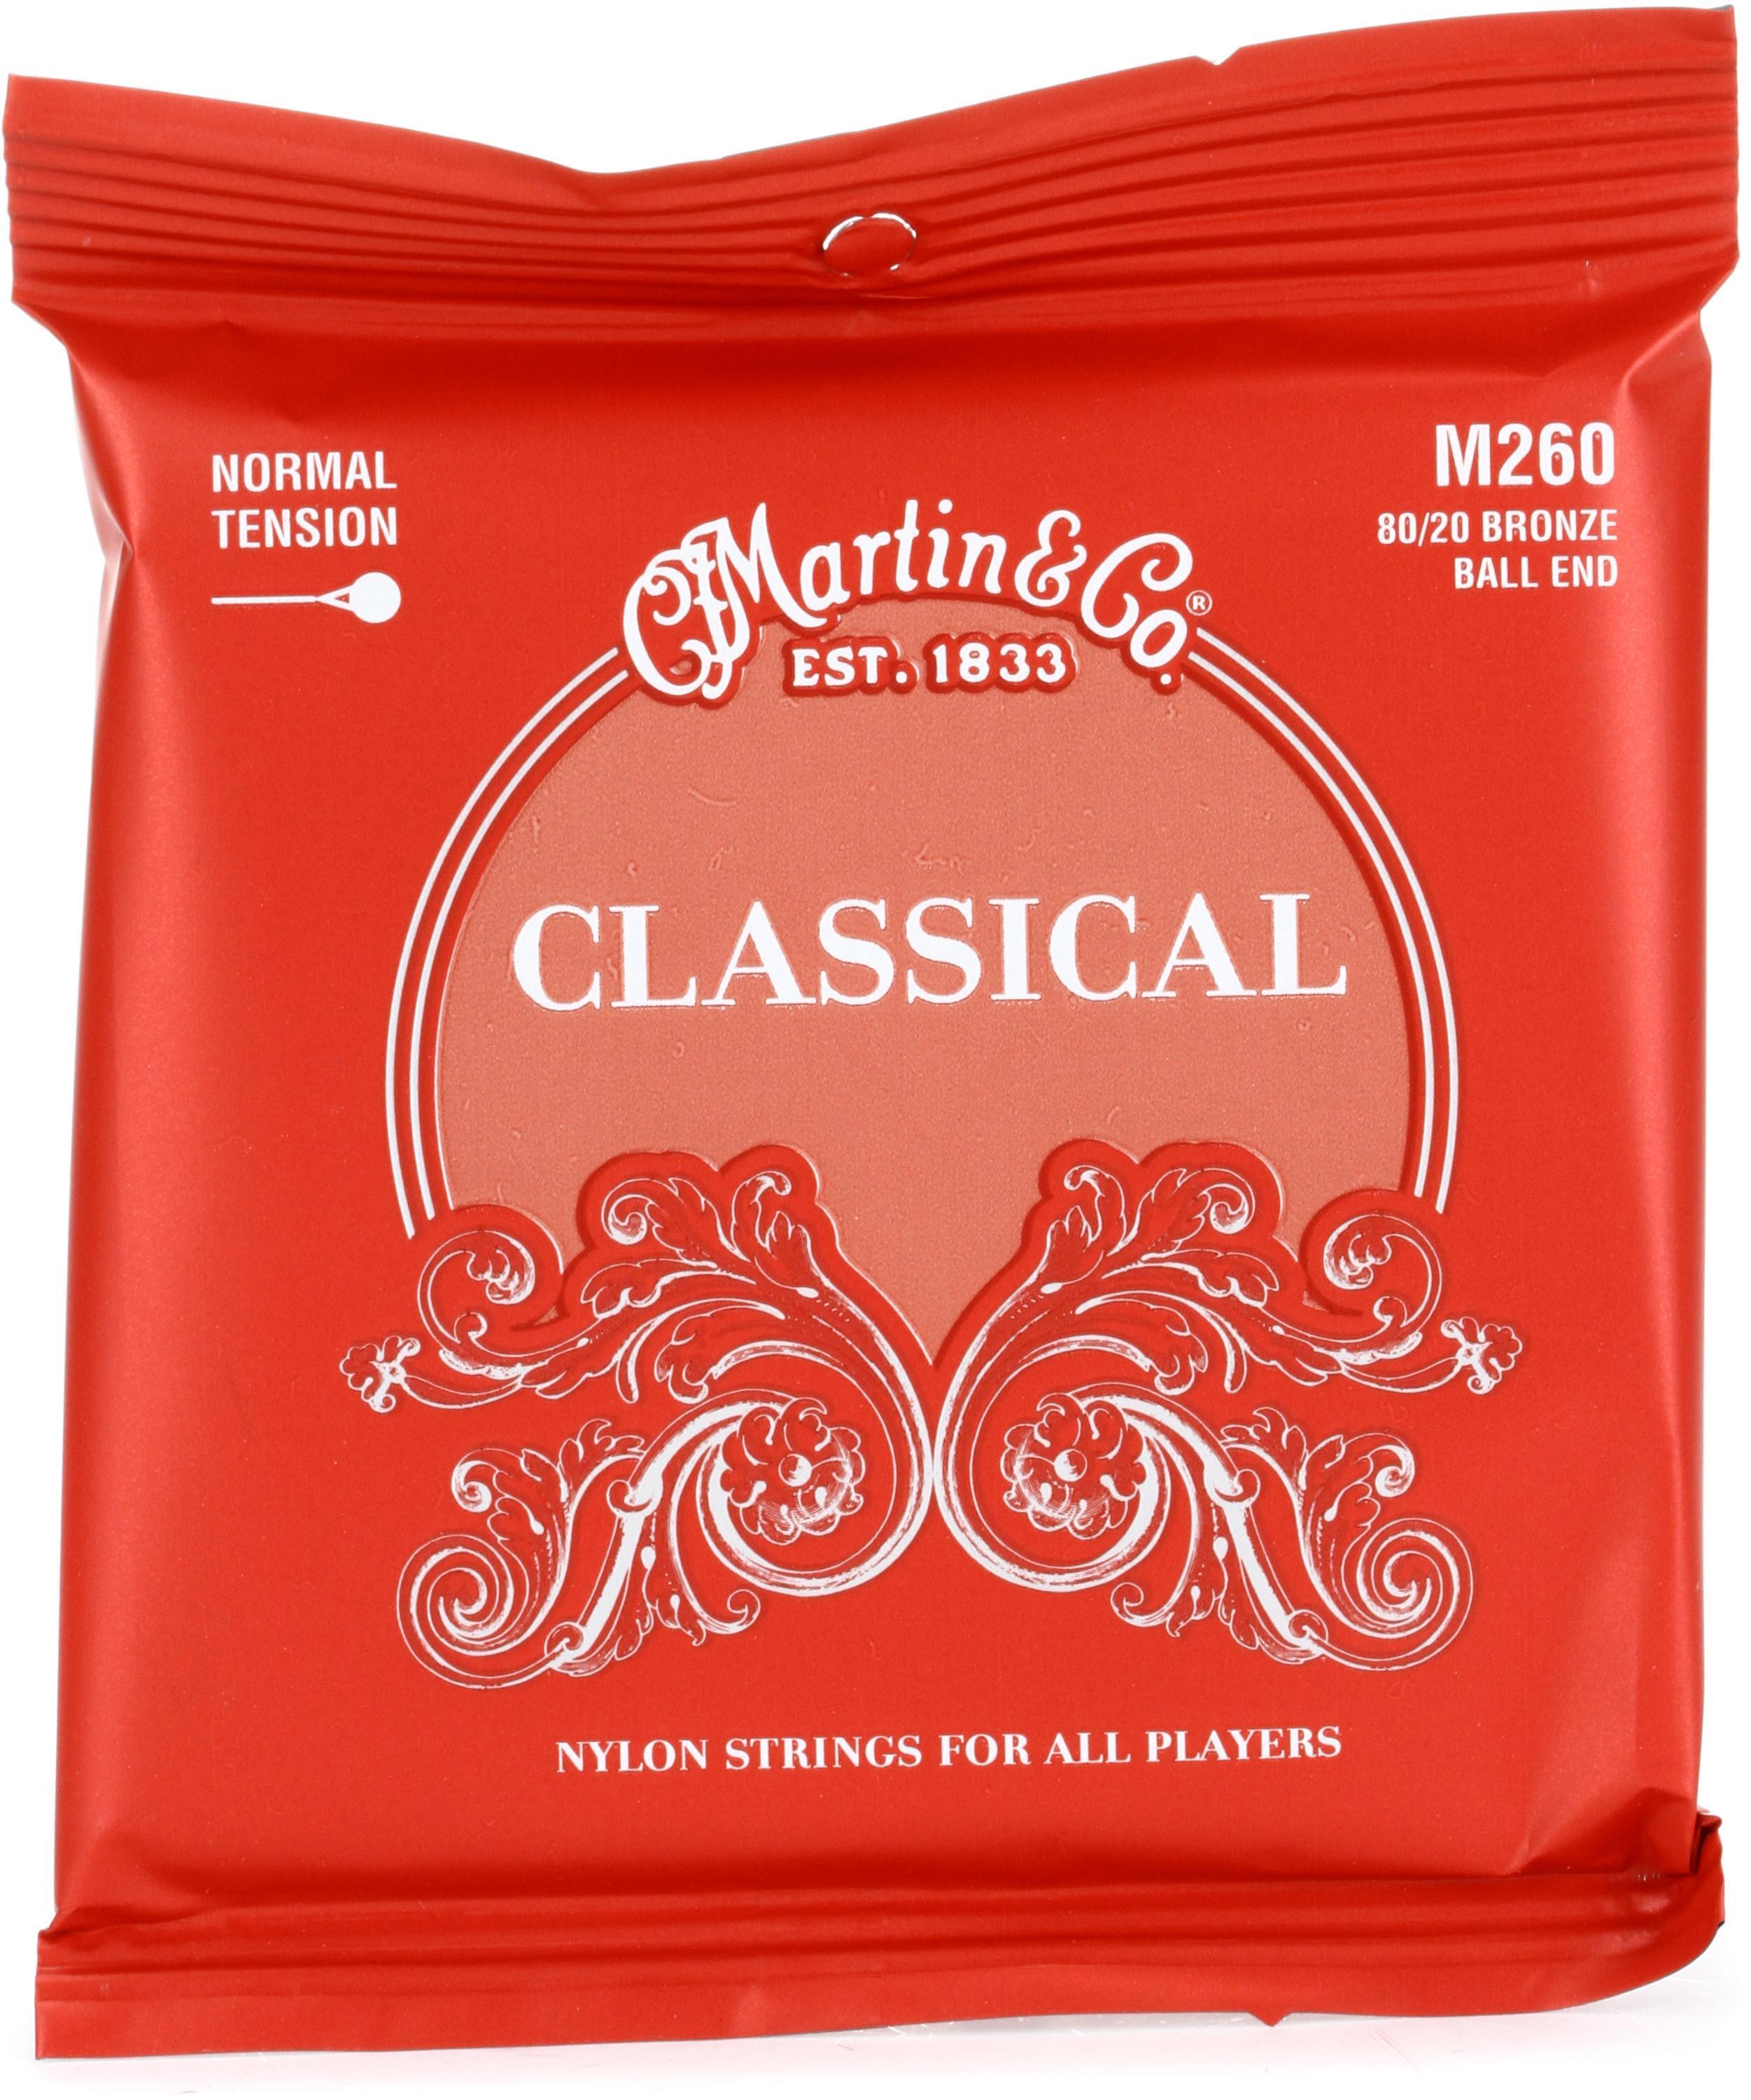 Martin Classical 80/20 Bronze Ball End Nylon Strings - Normal Tension | Sweetwater